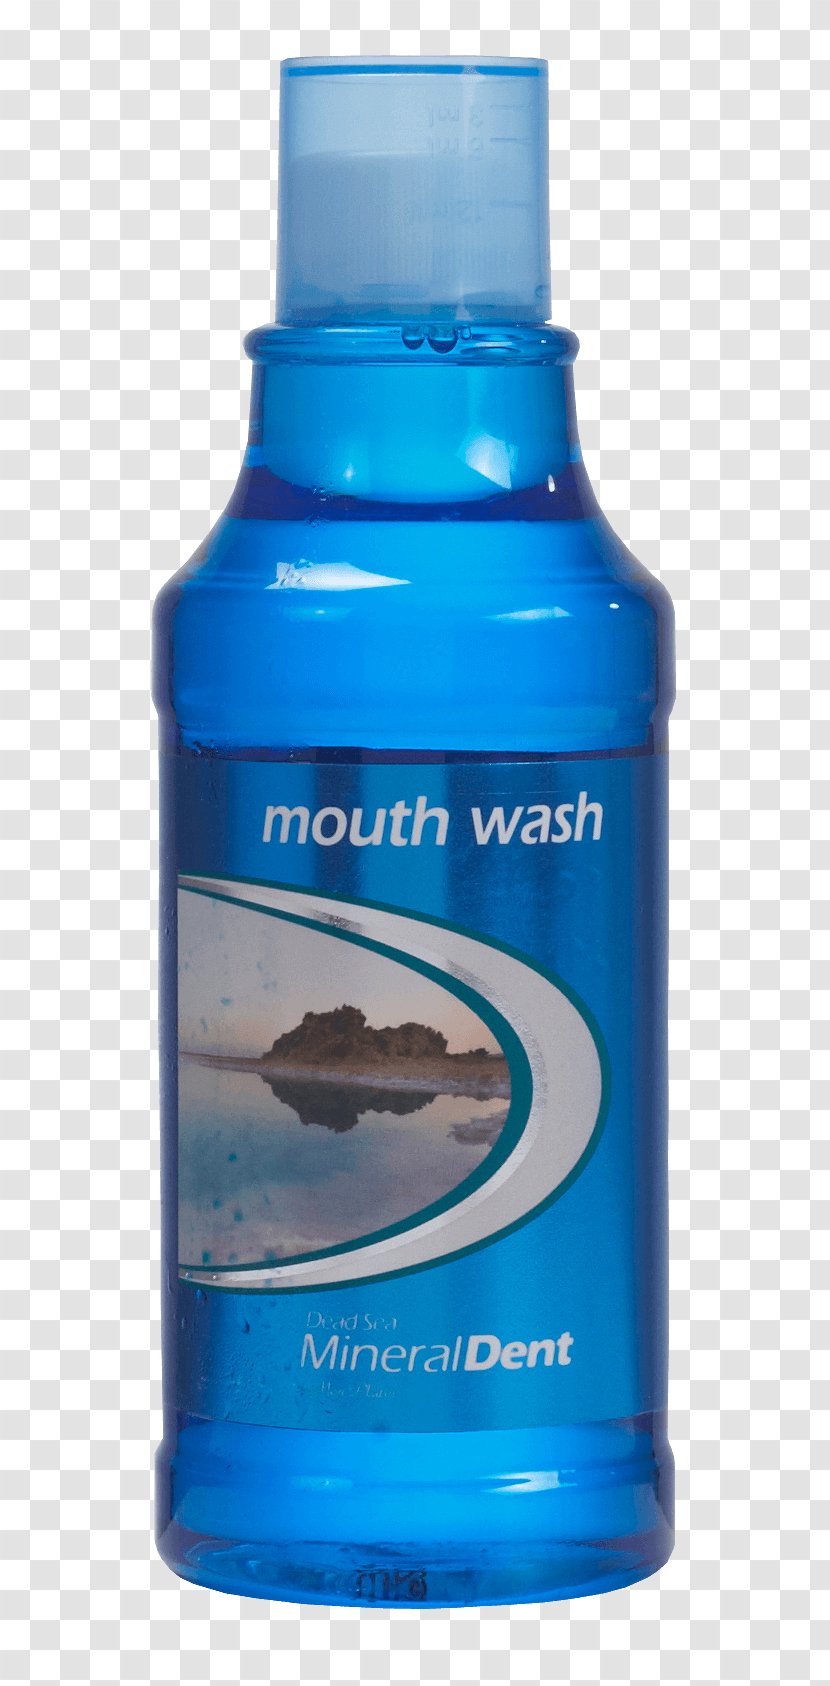 Mouthwash Dead Sea Mineral Tooth - Cosmetics Transparent PNG